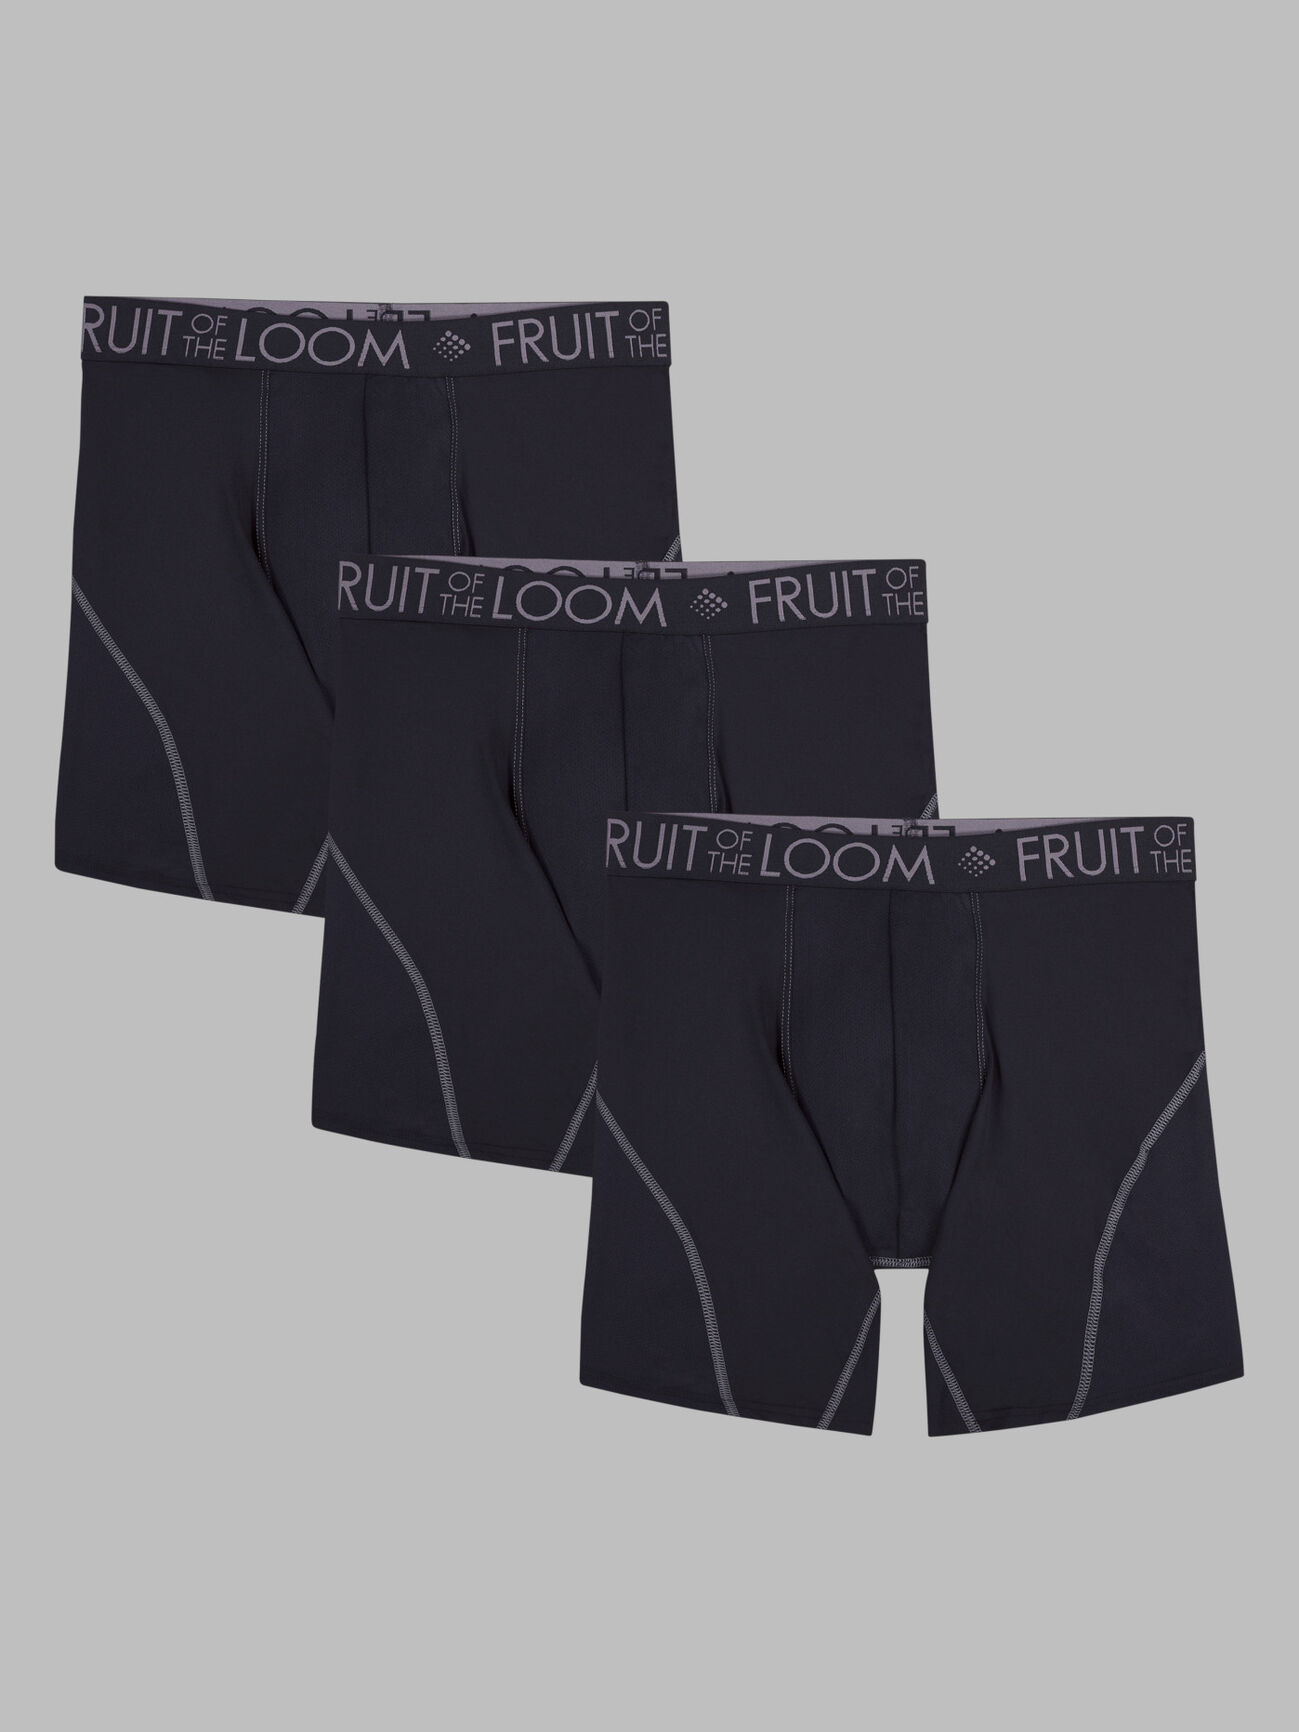 Fruit of the Loom Men's Fruitful Threads Trunk Boxer Briefs, 3 Pack 